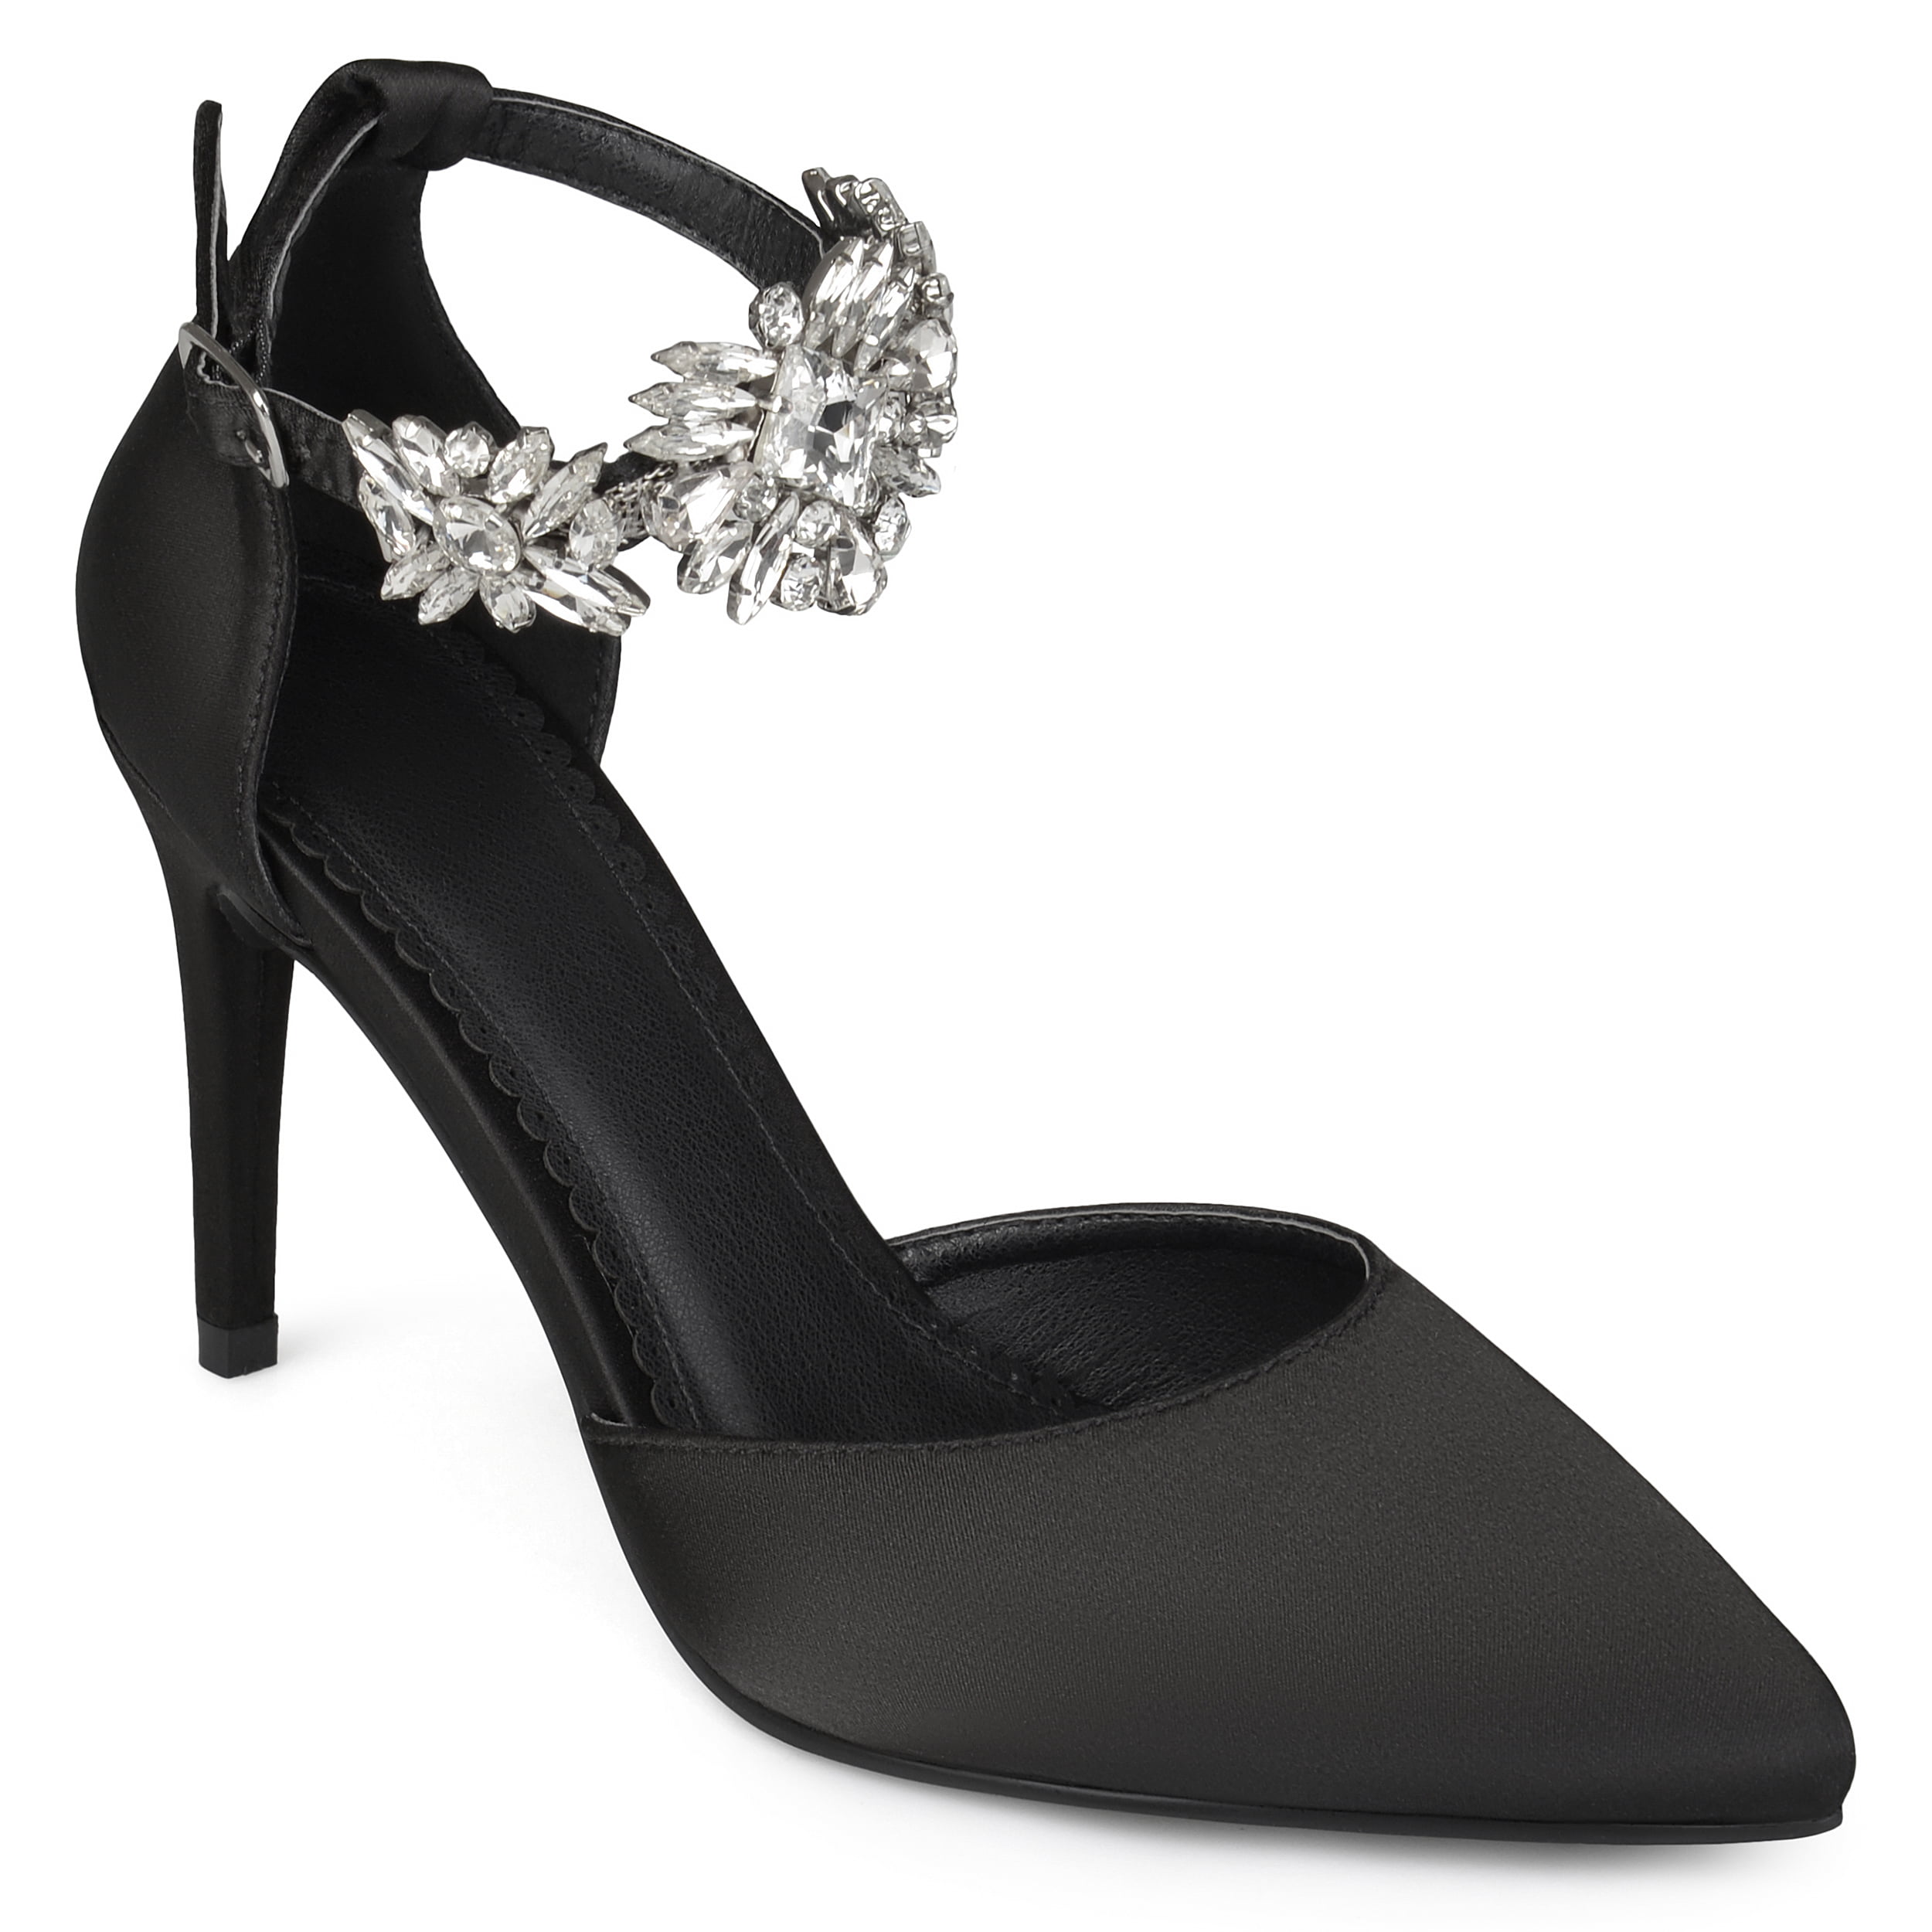 Brinley Co. - Women's Satin Pointed Toe Rhinestone Ankle Strap D'orsay ...